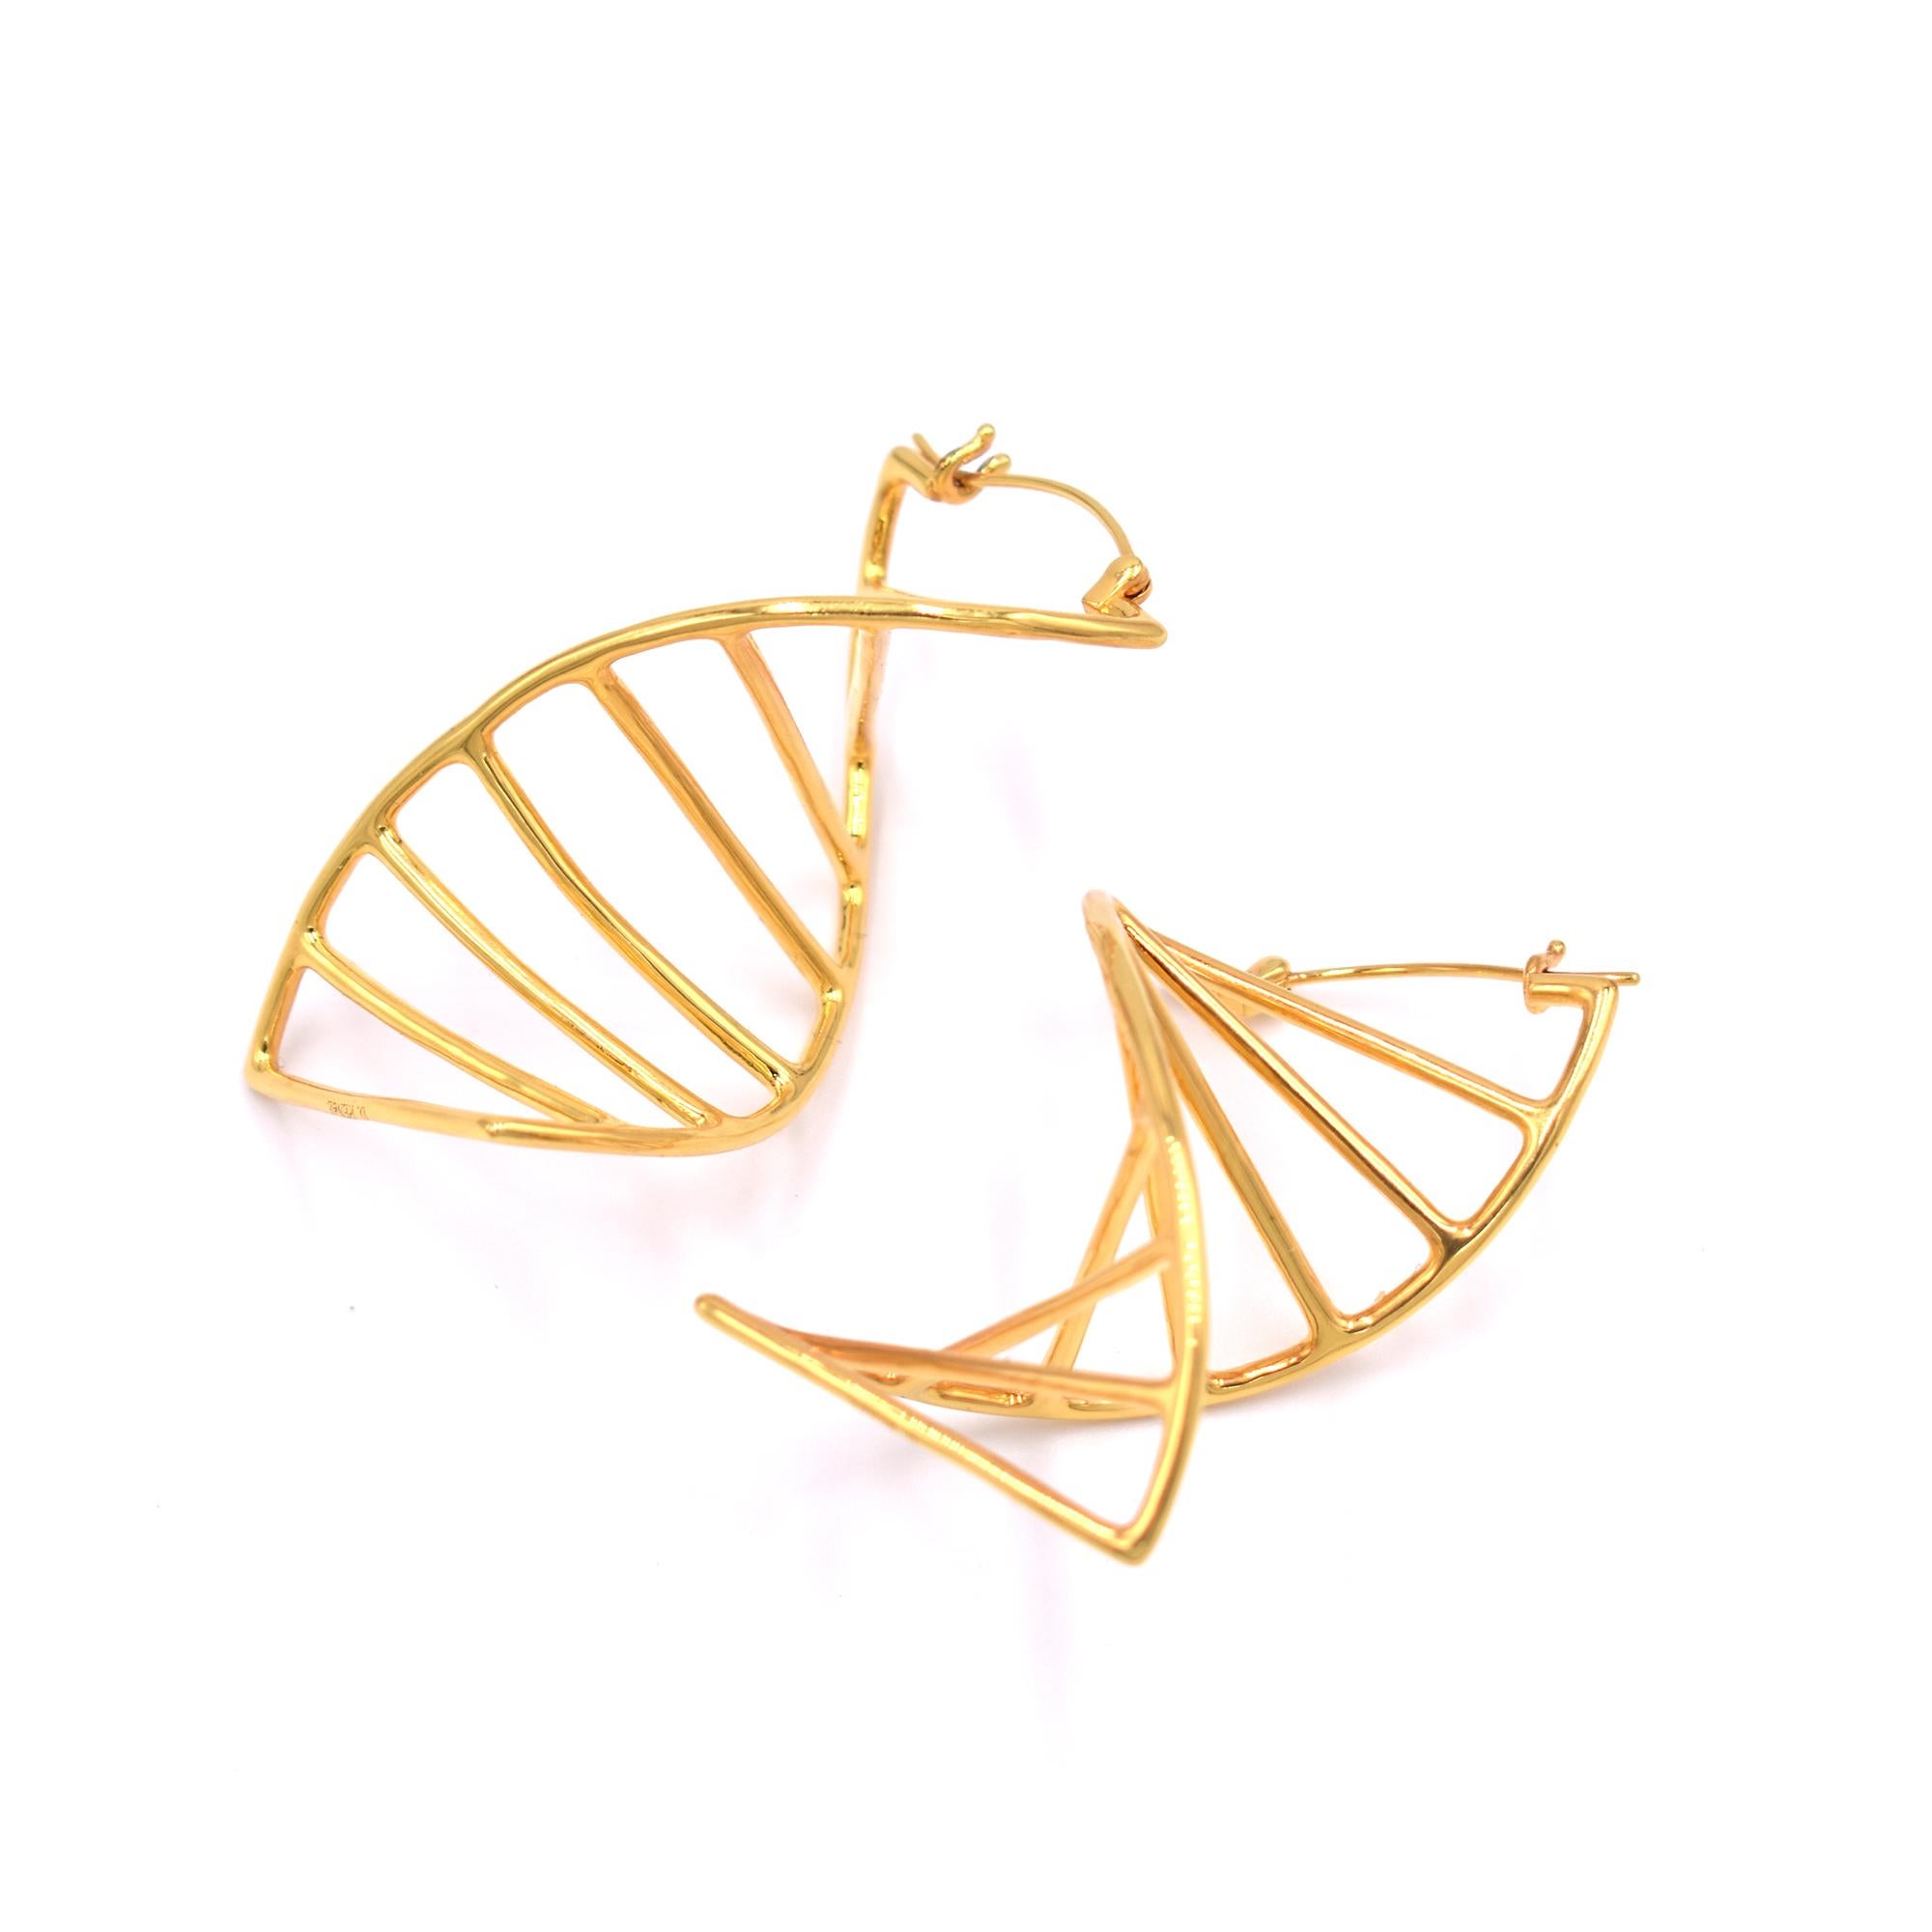 Look inward, not outward. It's in your DNA. Made in very small batches, these earrings are cast in 18K Gold vermeil. They measure 2 inches in length.

Dominique Renée is a 3d printed line of jewelry that sassily explores life, love and loss.